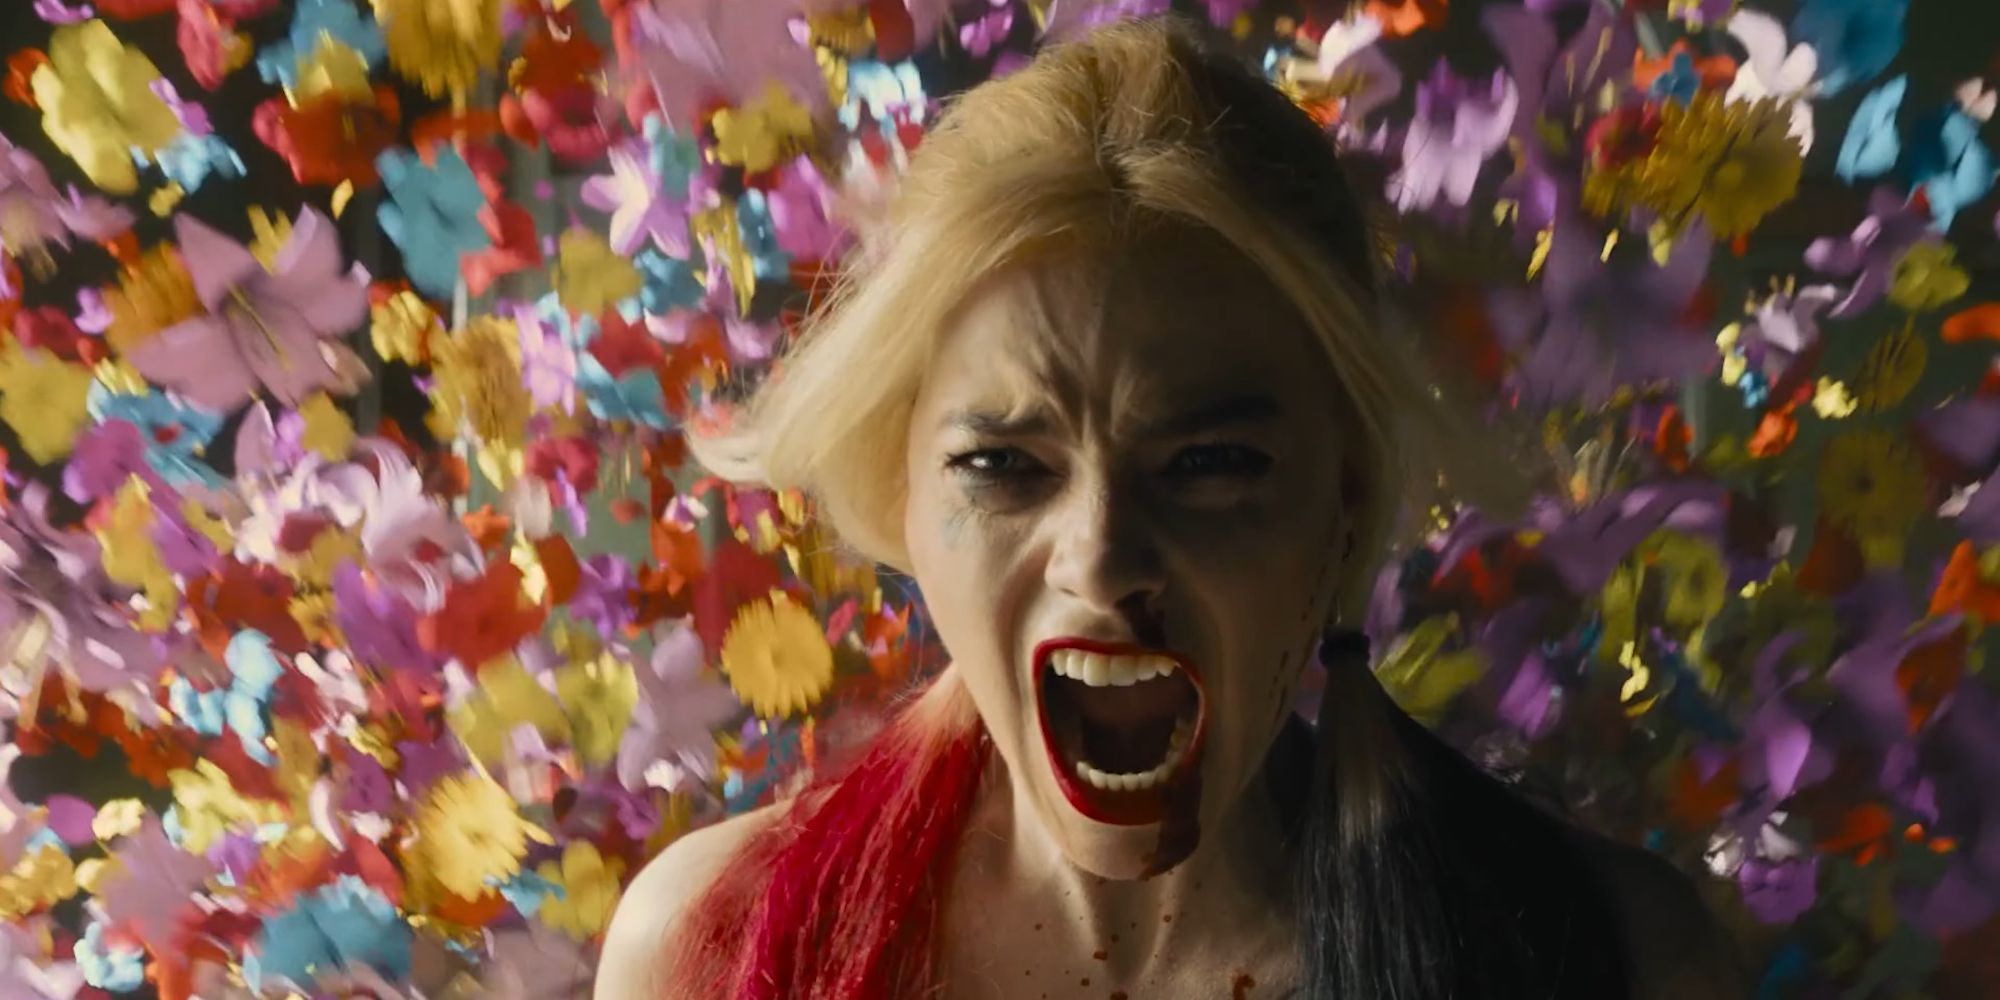 Margot Robbie's Harley Quinn letting out a battle cry as flowers shower in The Suicide Squad